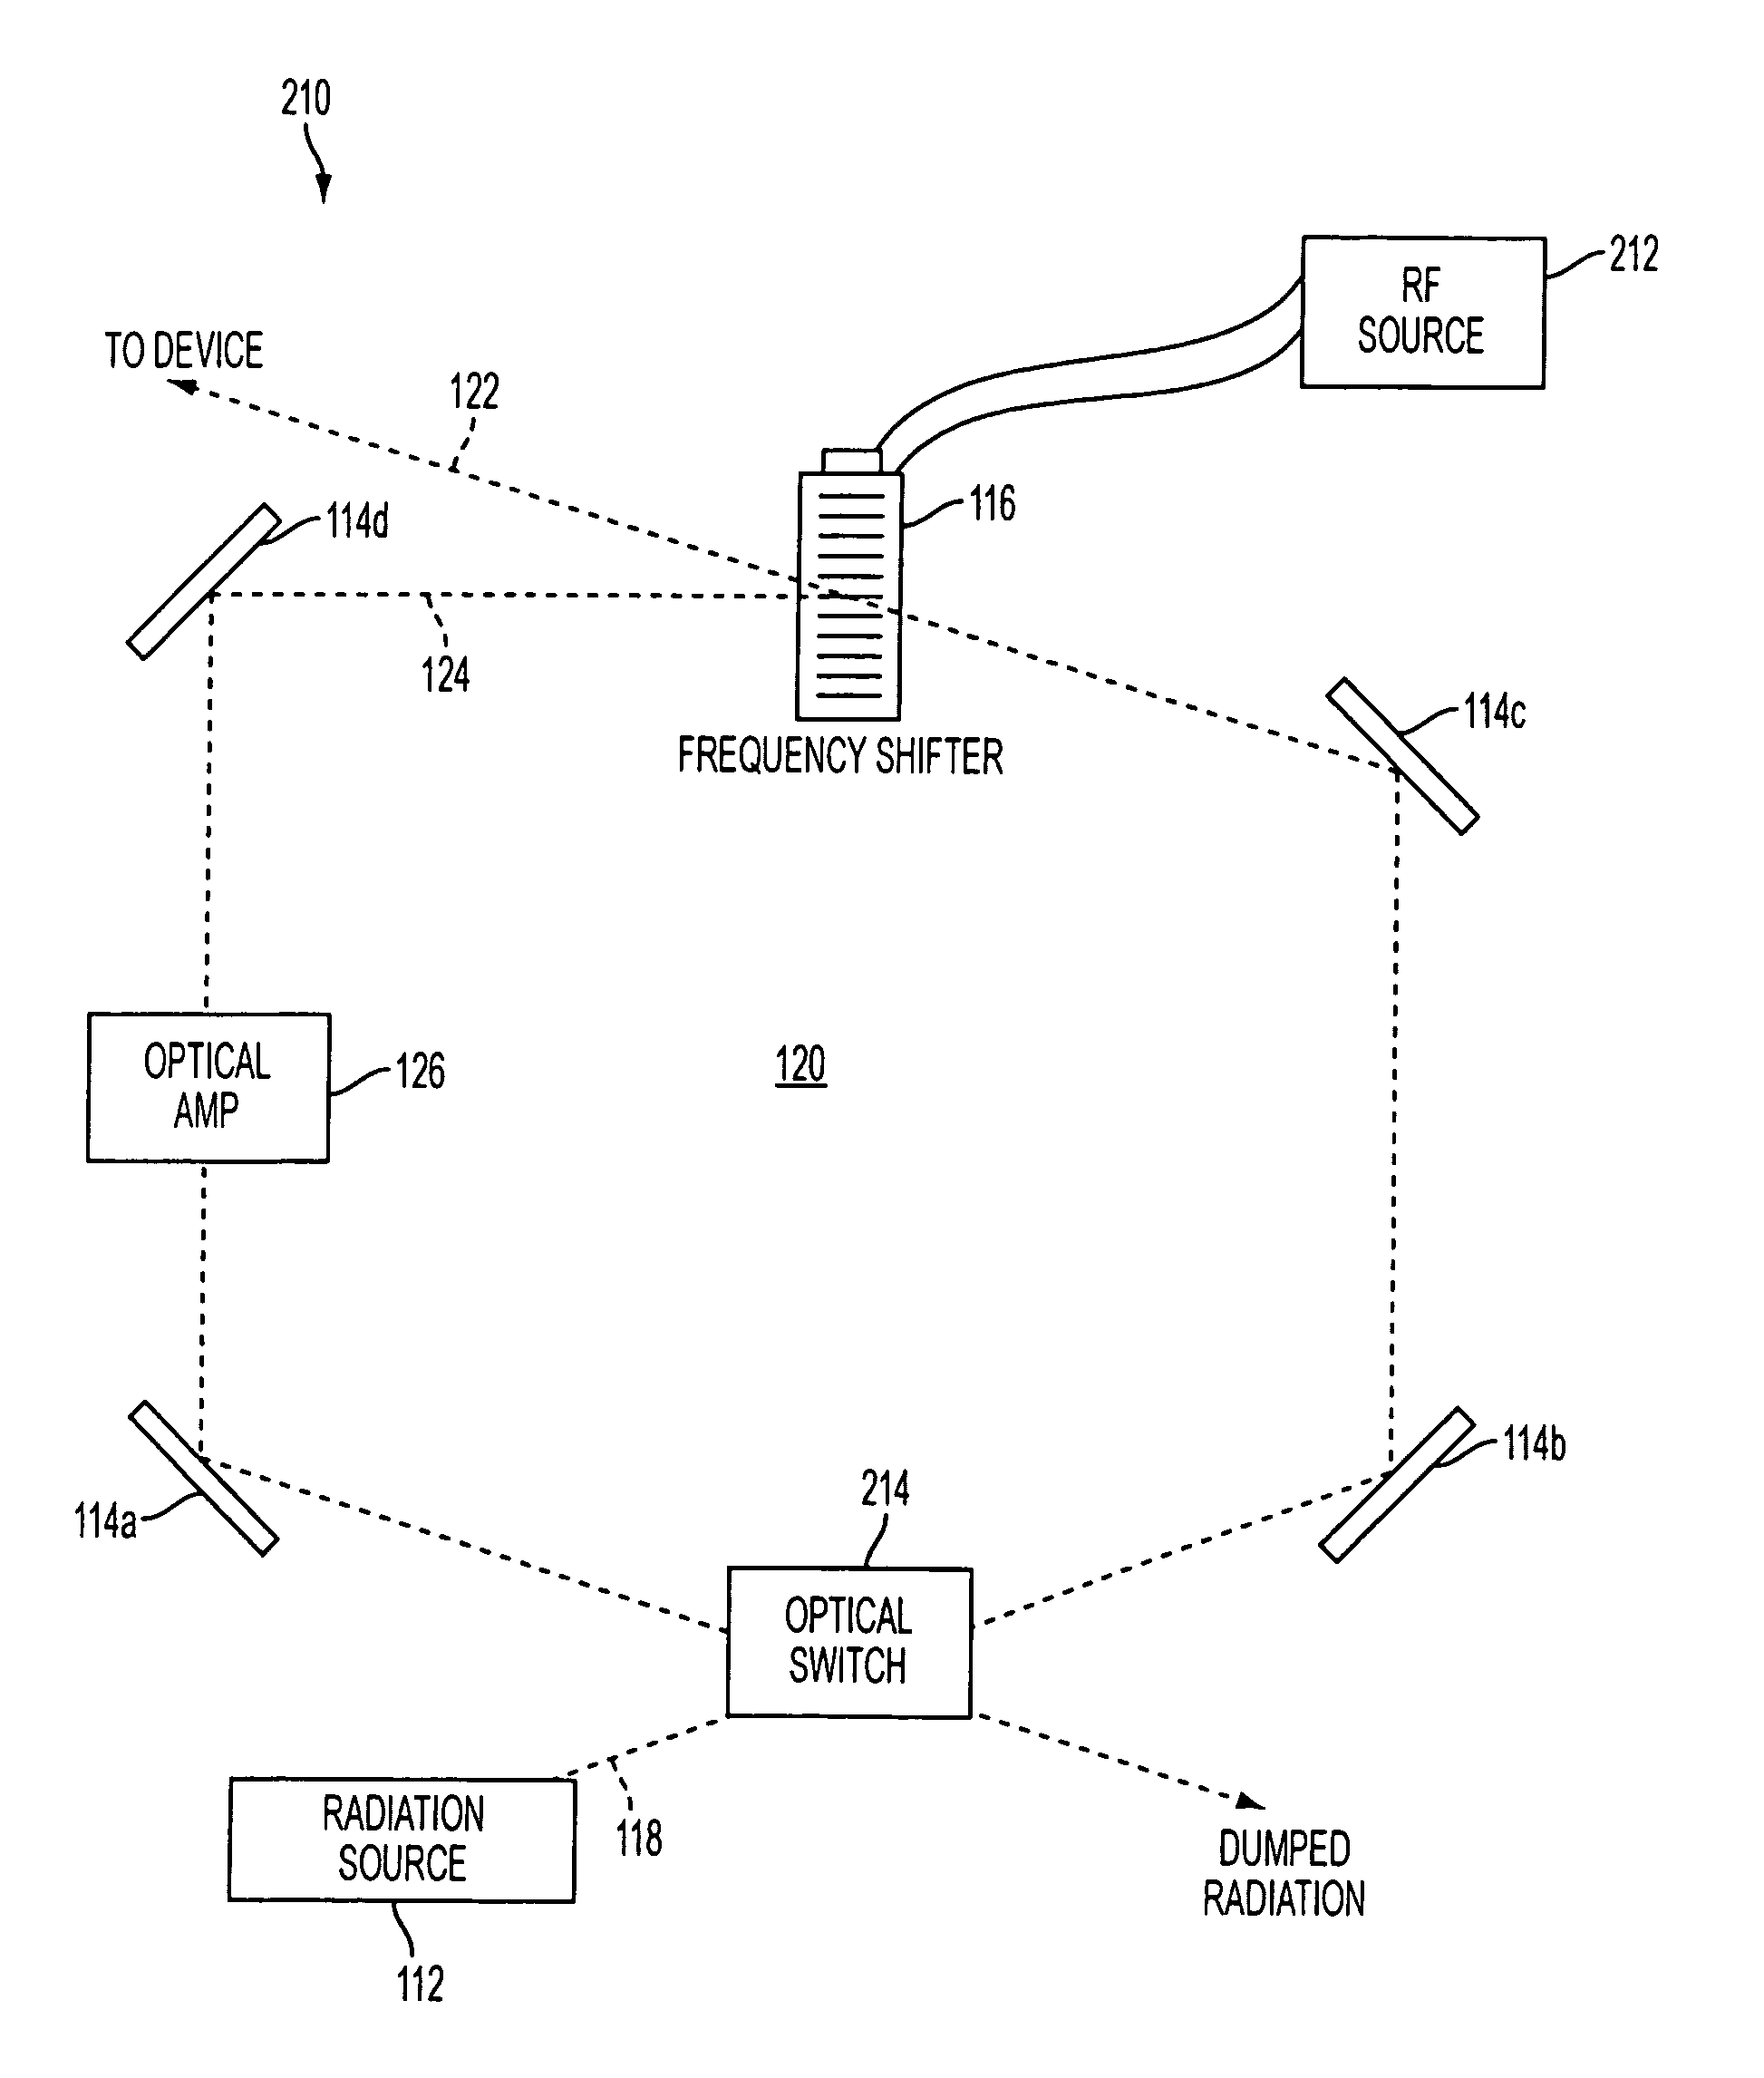 System and method for providing chirped electromagnetic radiation